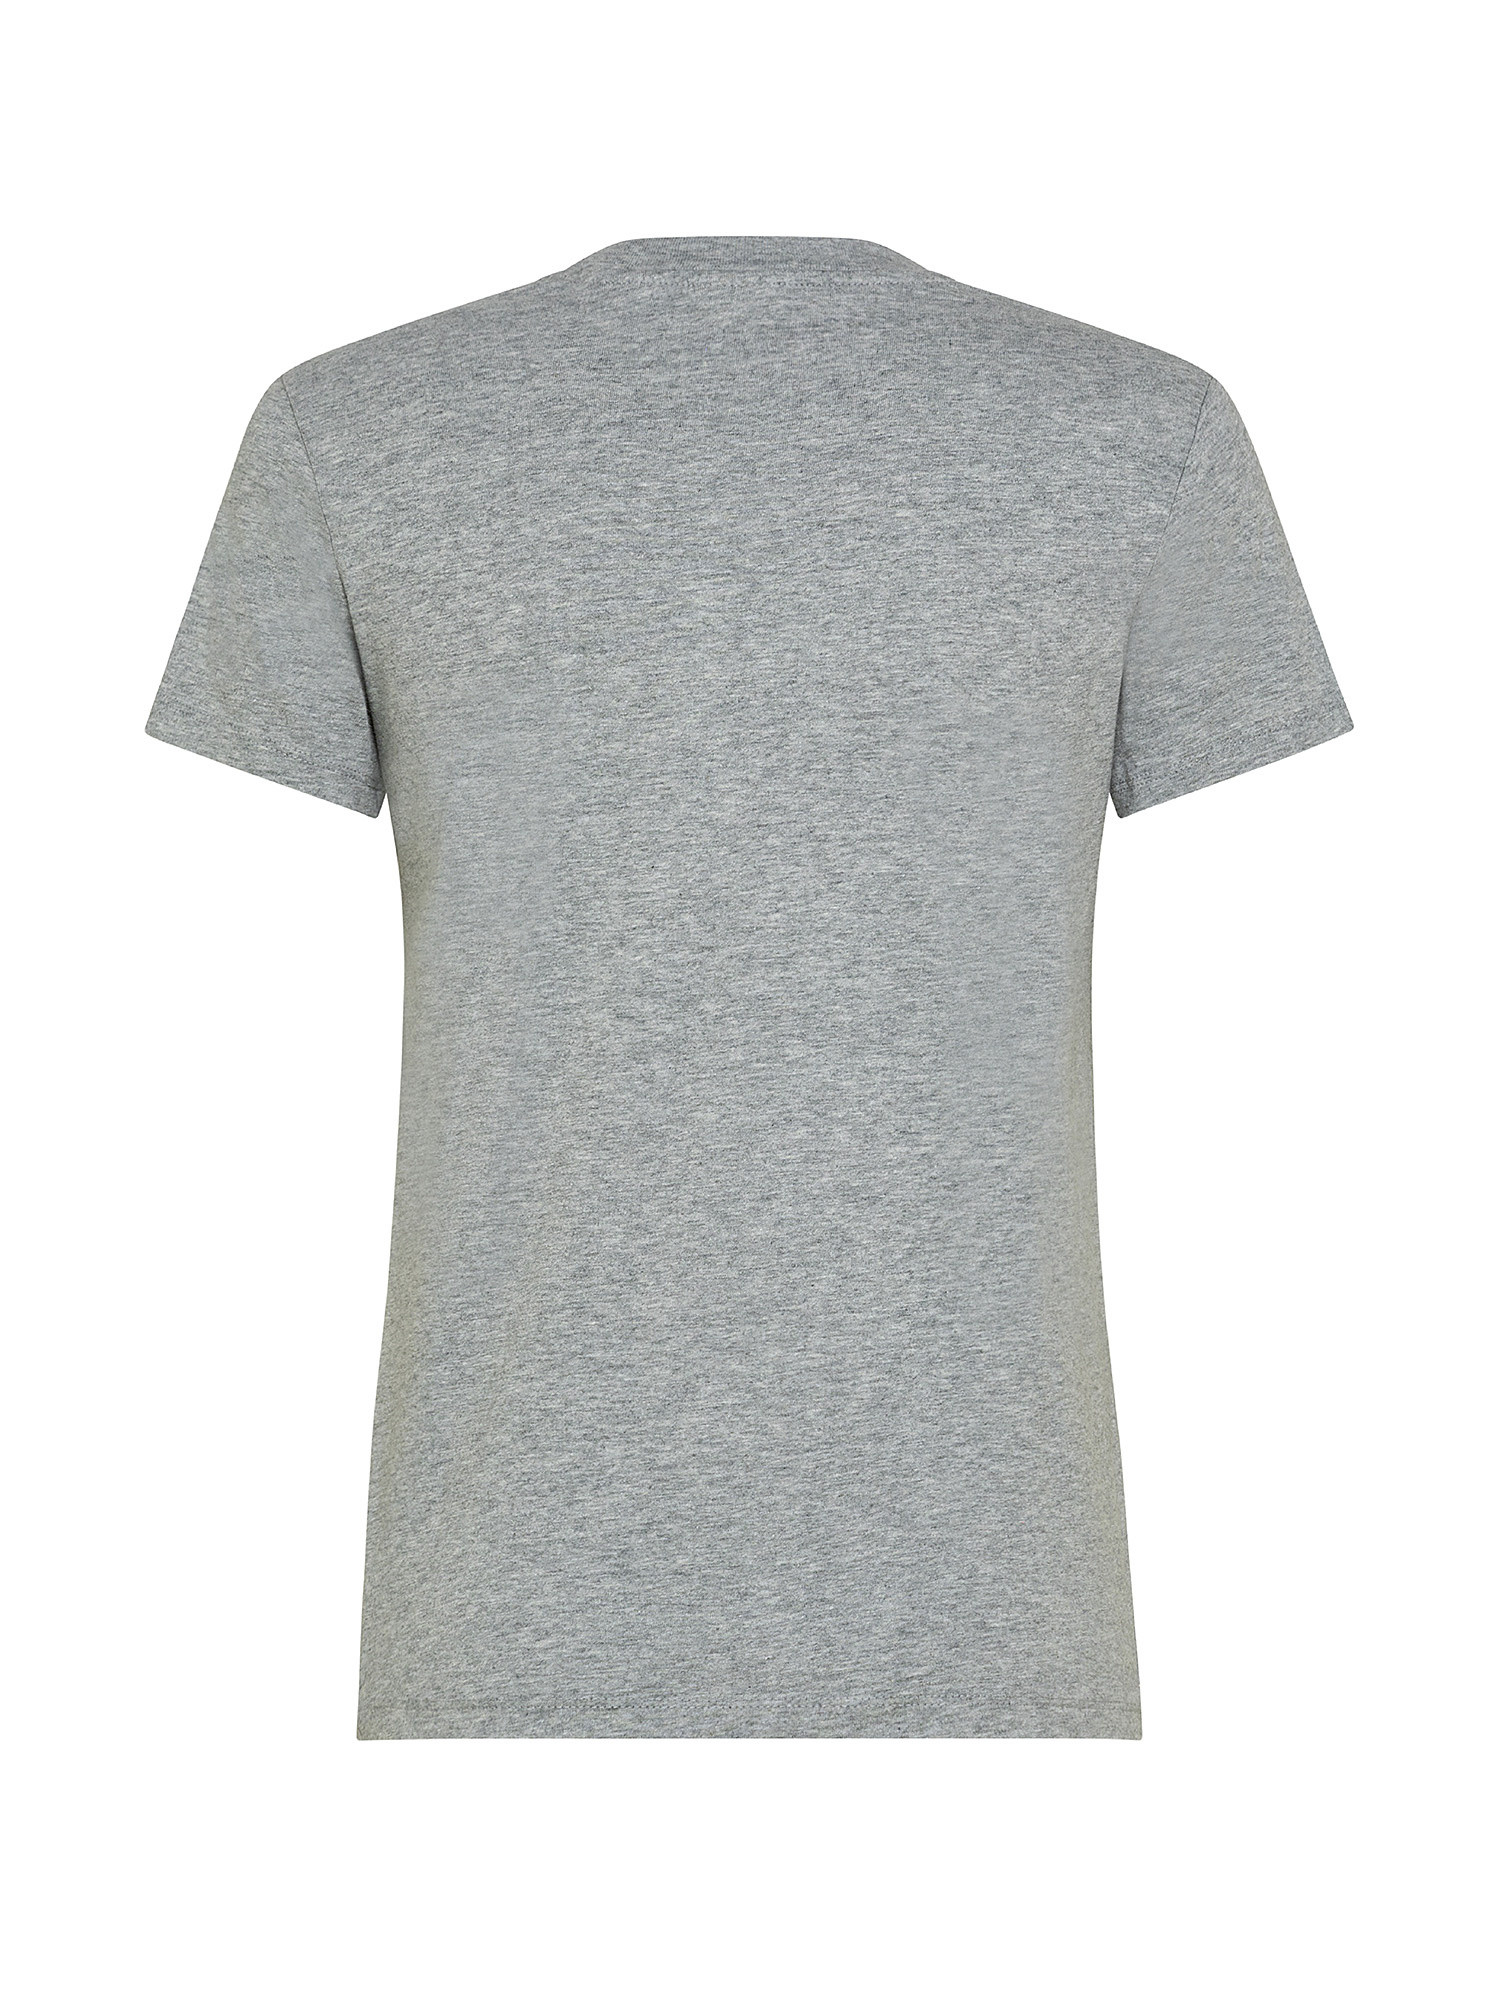 Perfect Tee T-shirt, Grey, large image number 1